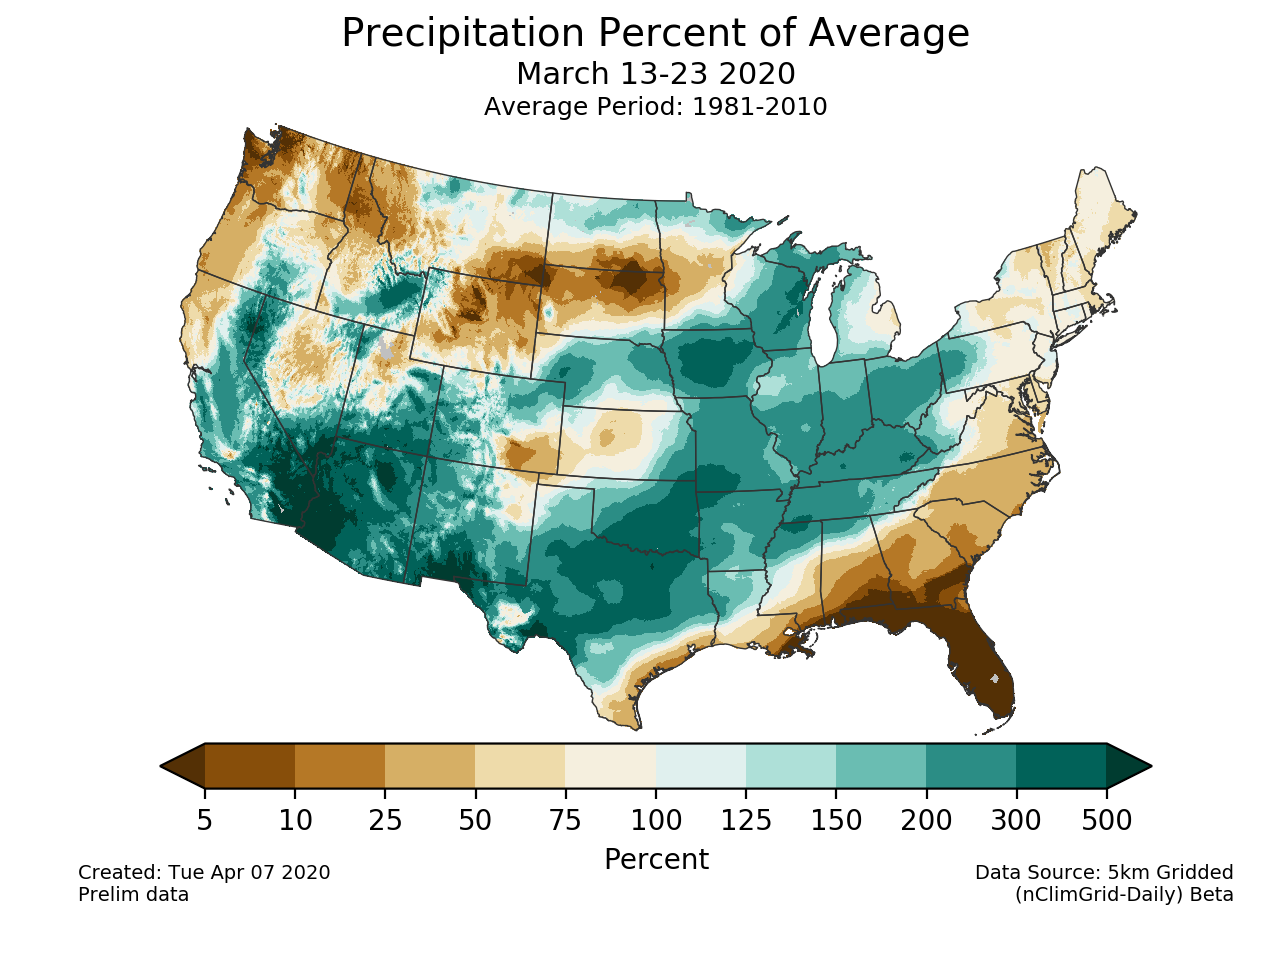 Precipitation anomalies (percent of normal) for the CONUS for March 13-23 2020